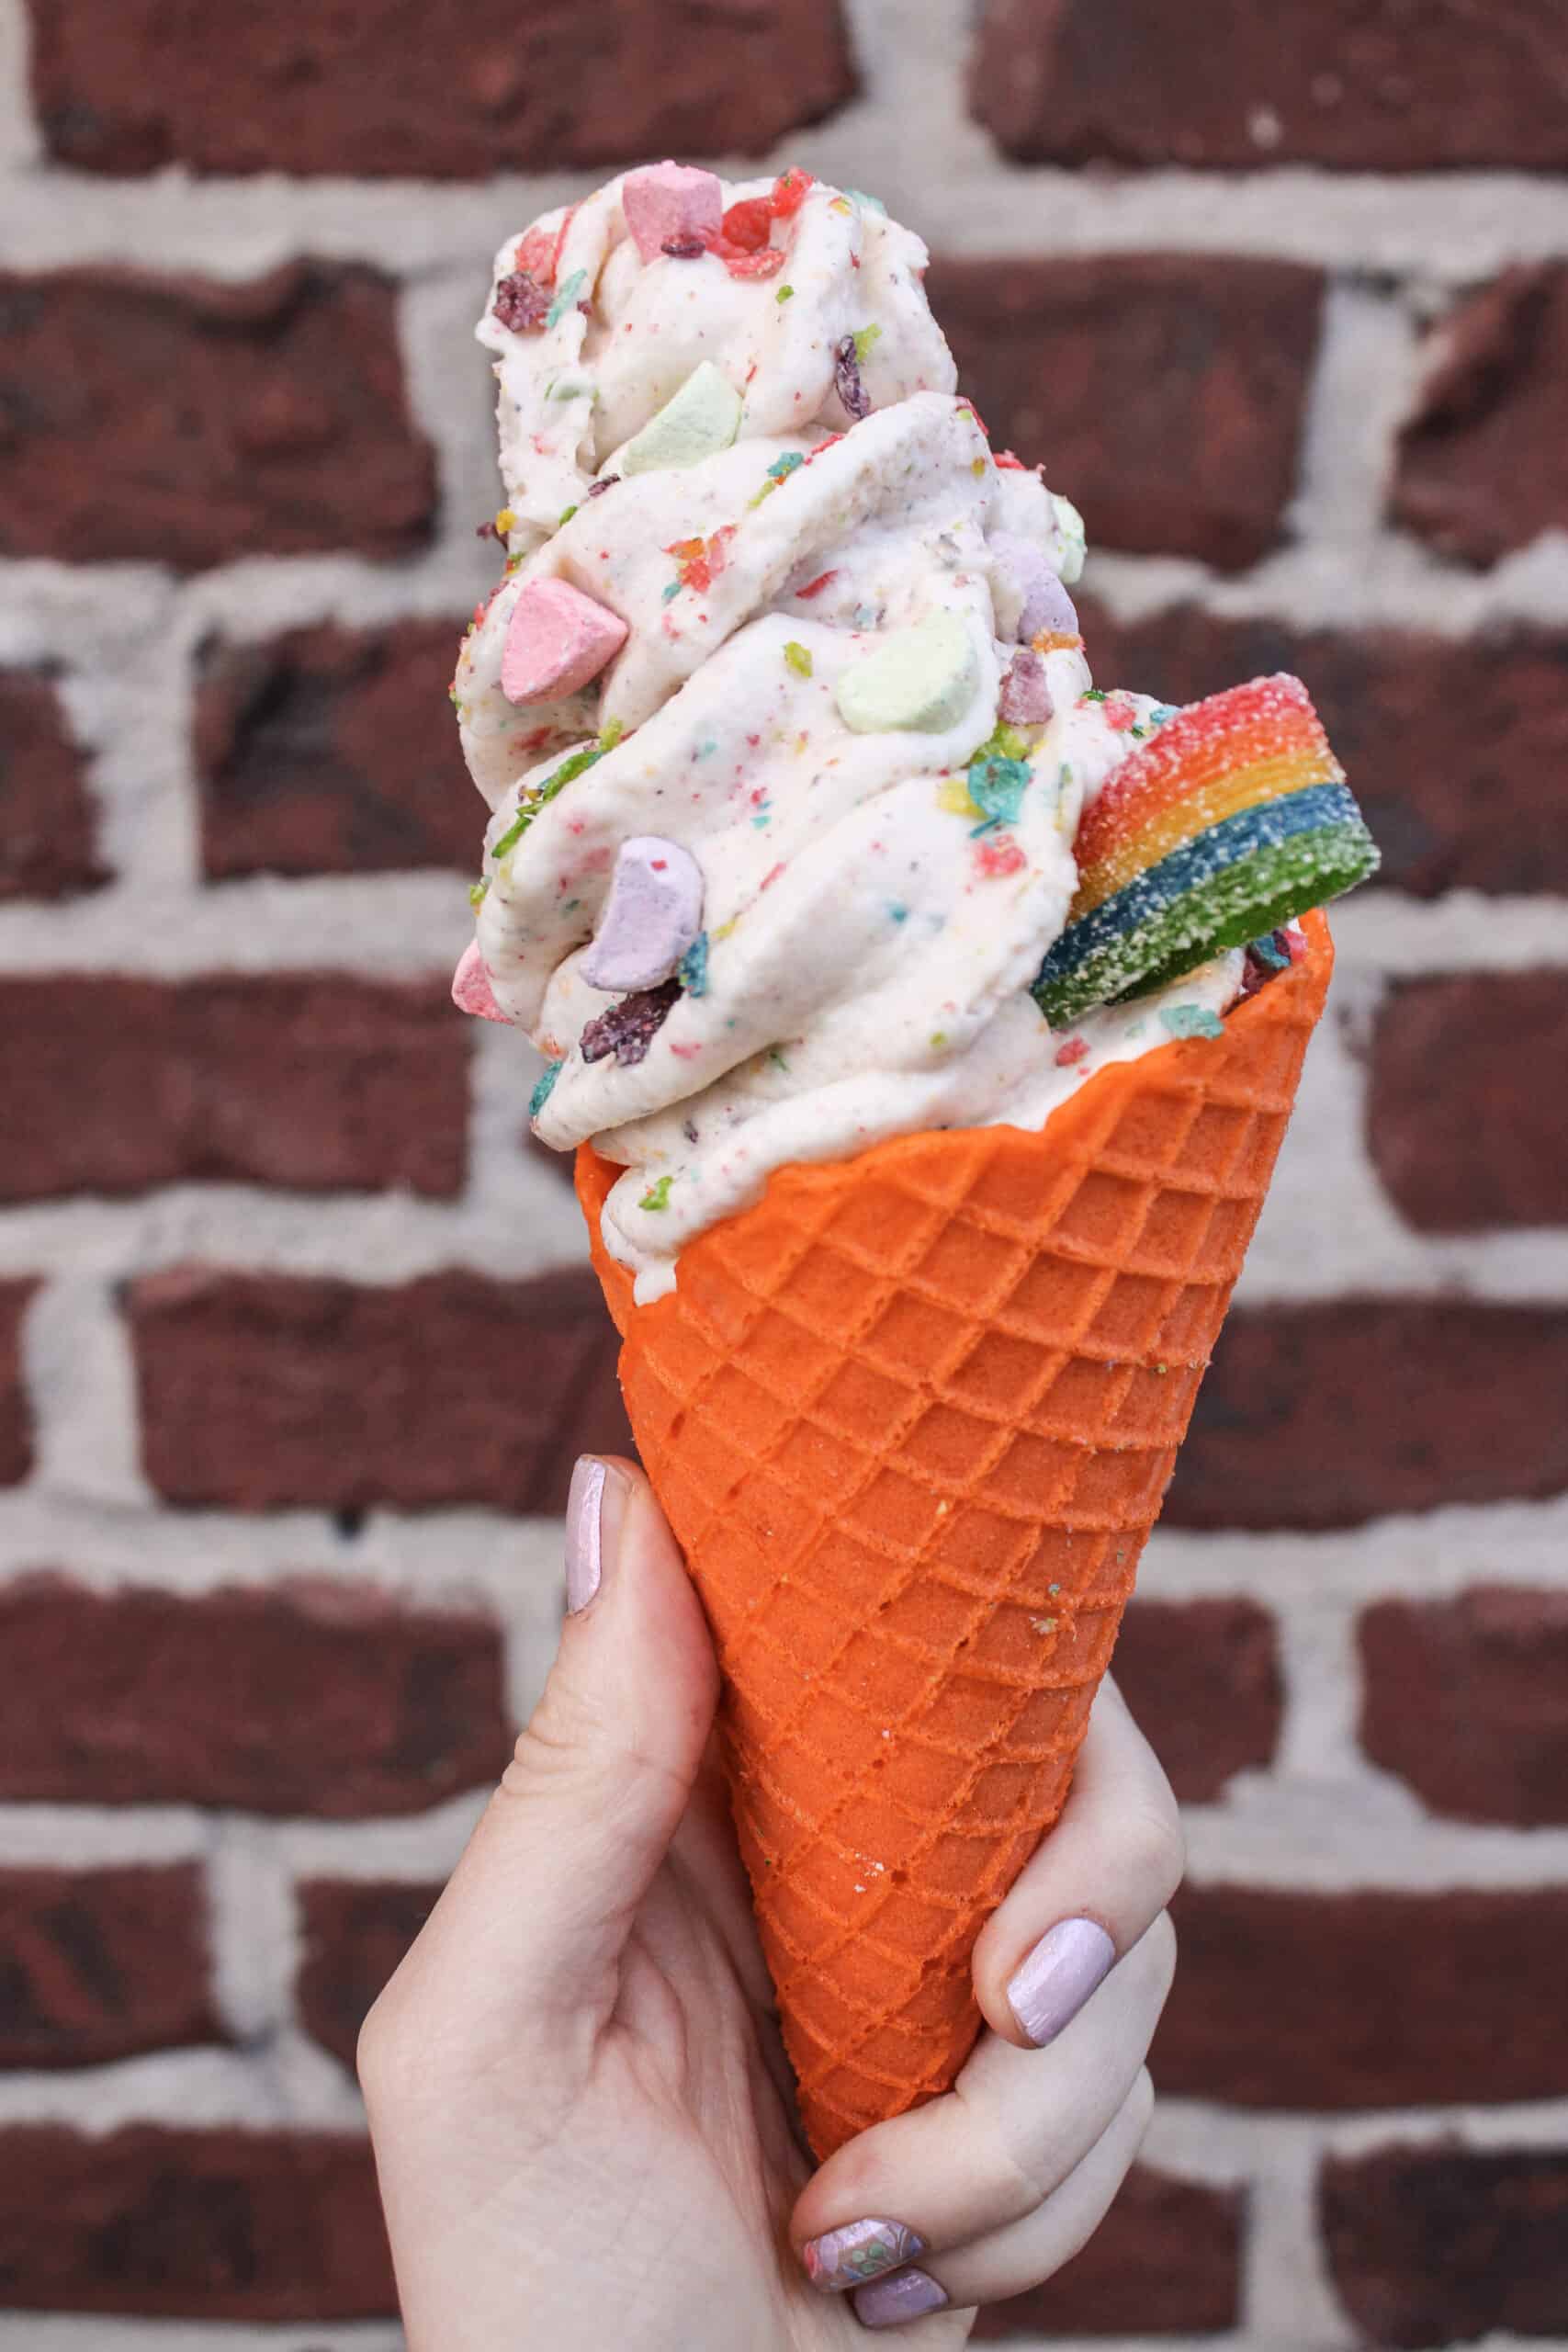 Spilled Milk's "Over the Rainbow" cone featuring Fruity Pebbles and Captain Crunch flavored ice cream, in a creamsicle cone, and topped with a rainbow sour rope